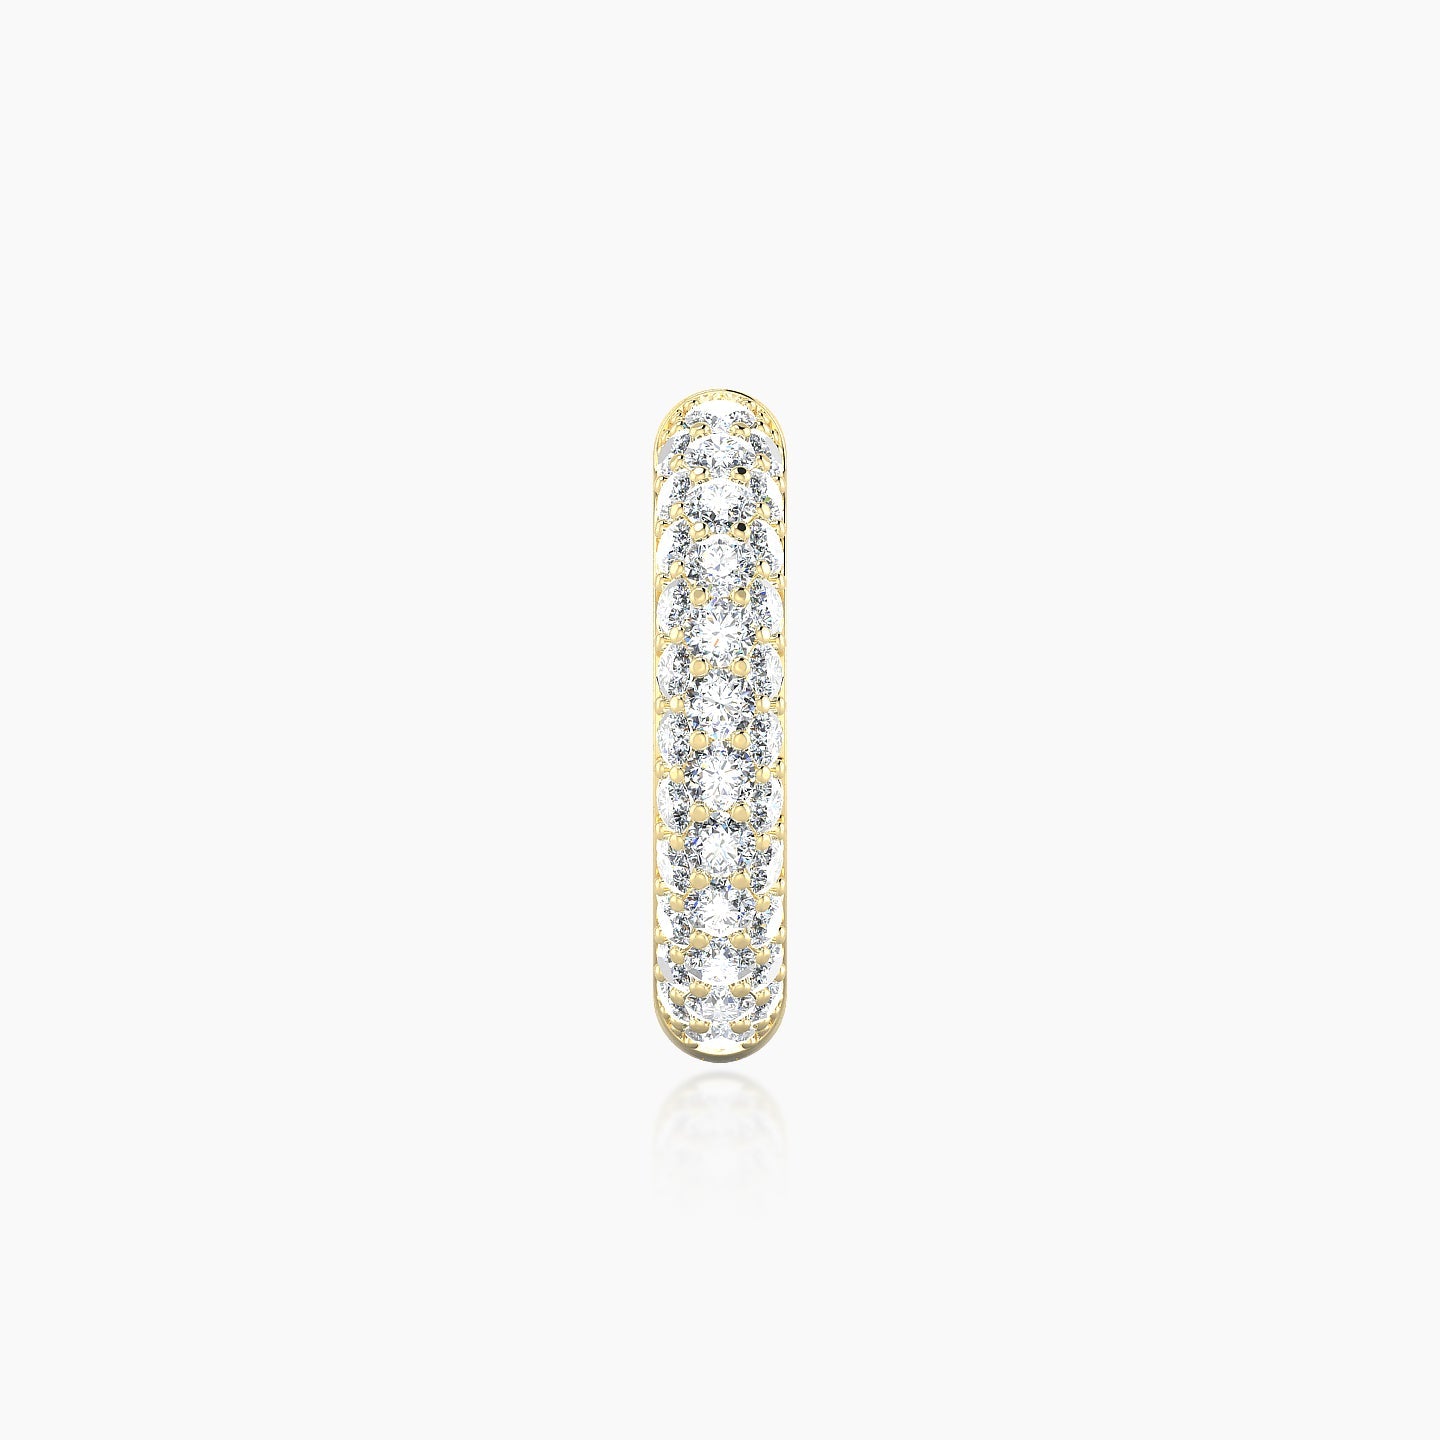 Theia | 18k Yellow Gold 9.5 mm Pave Diamond Nose Ring Piercing